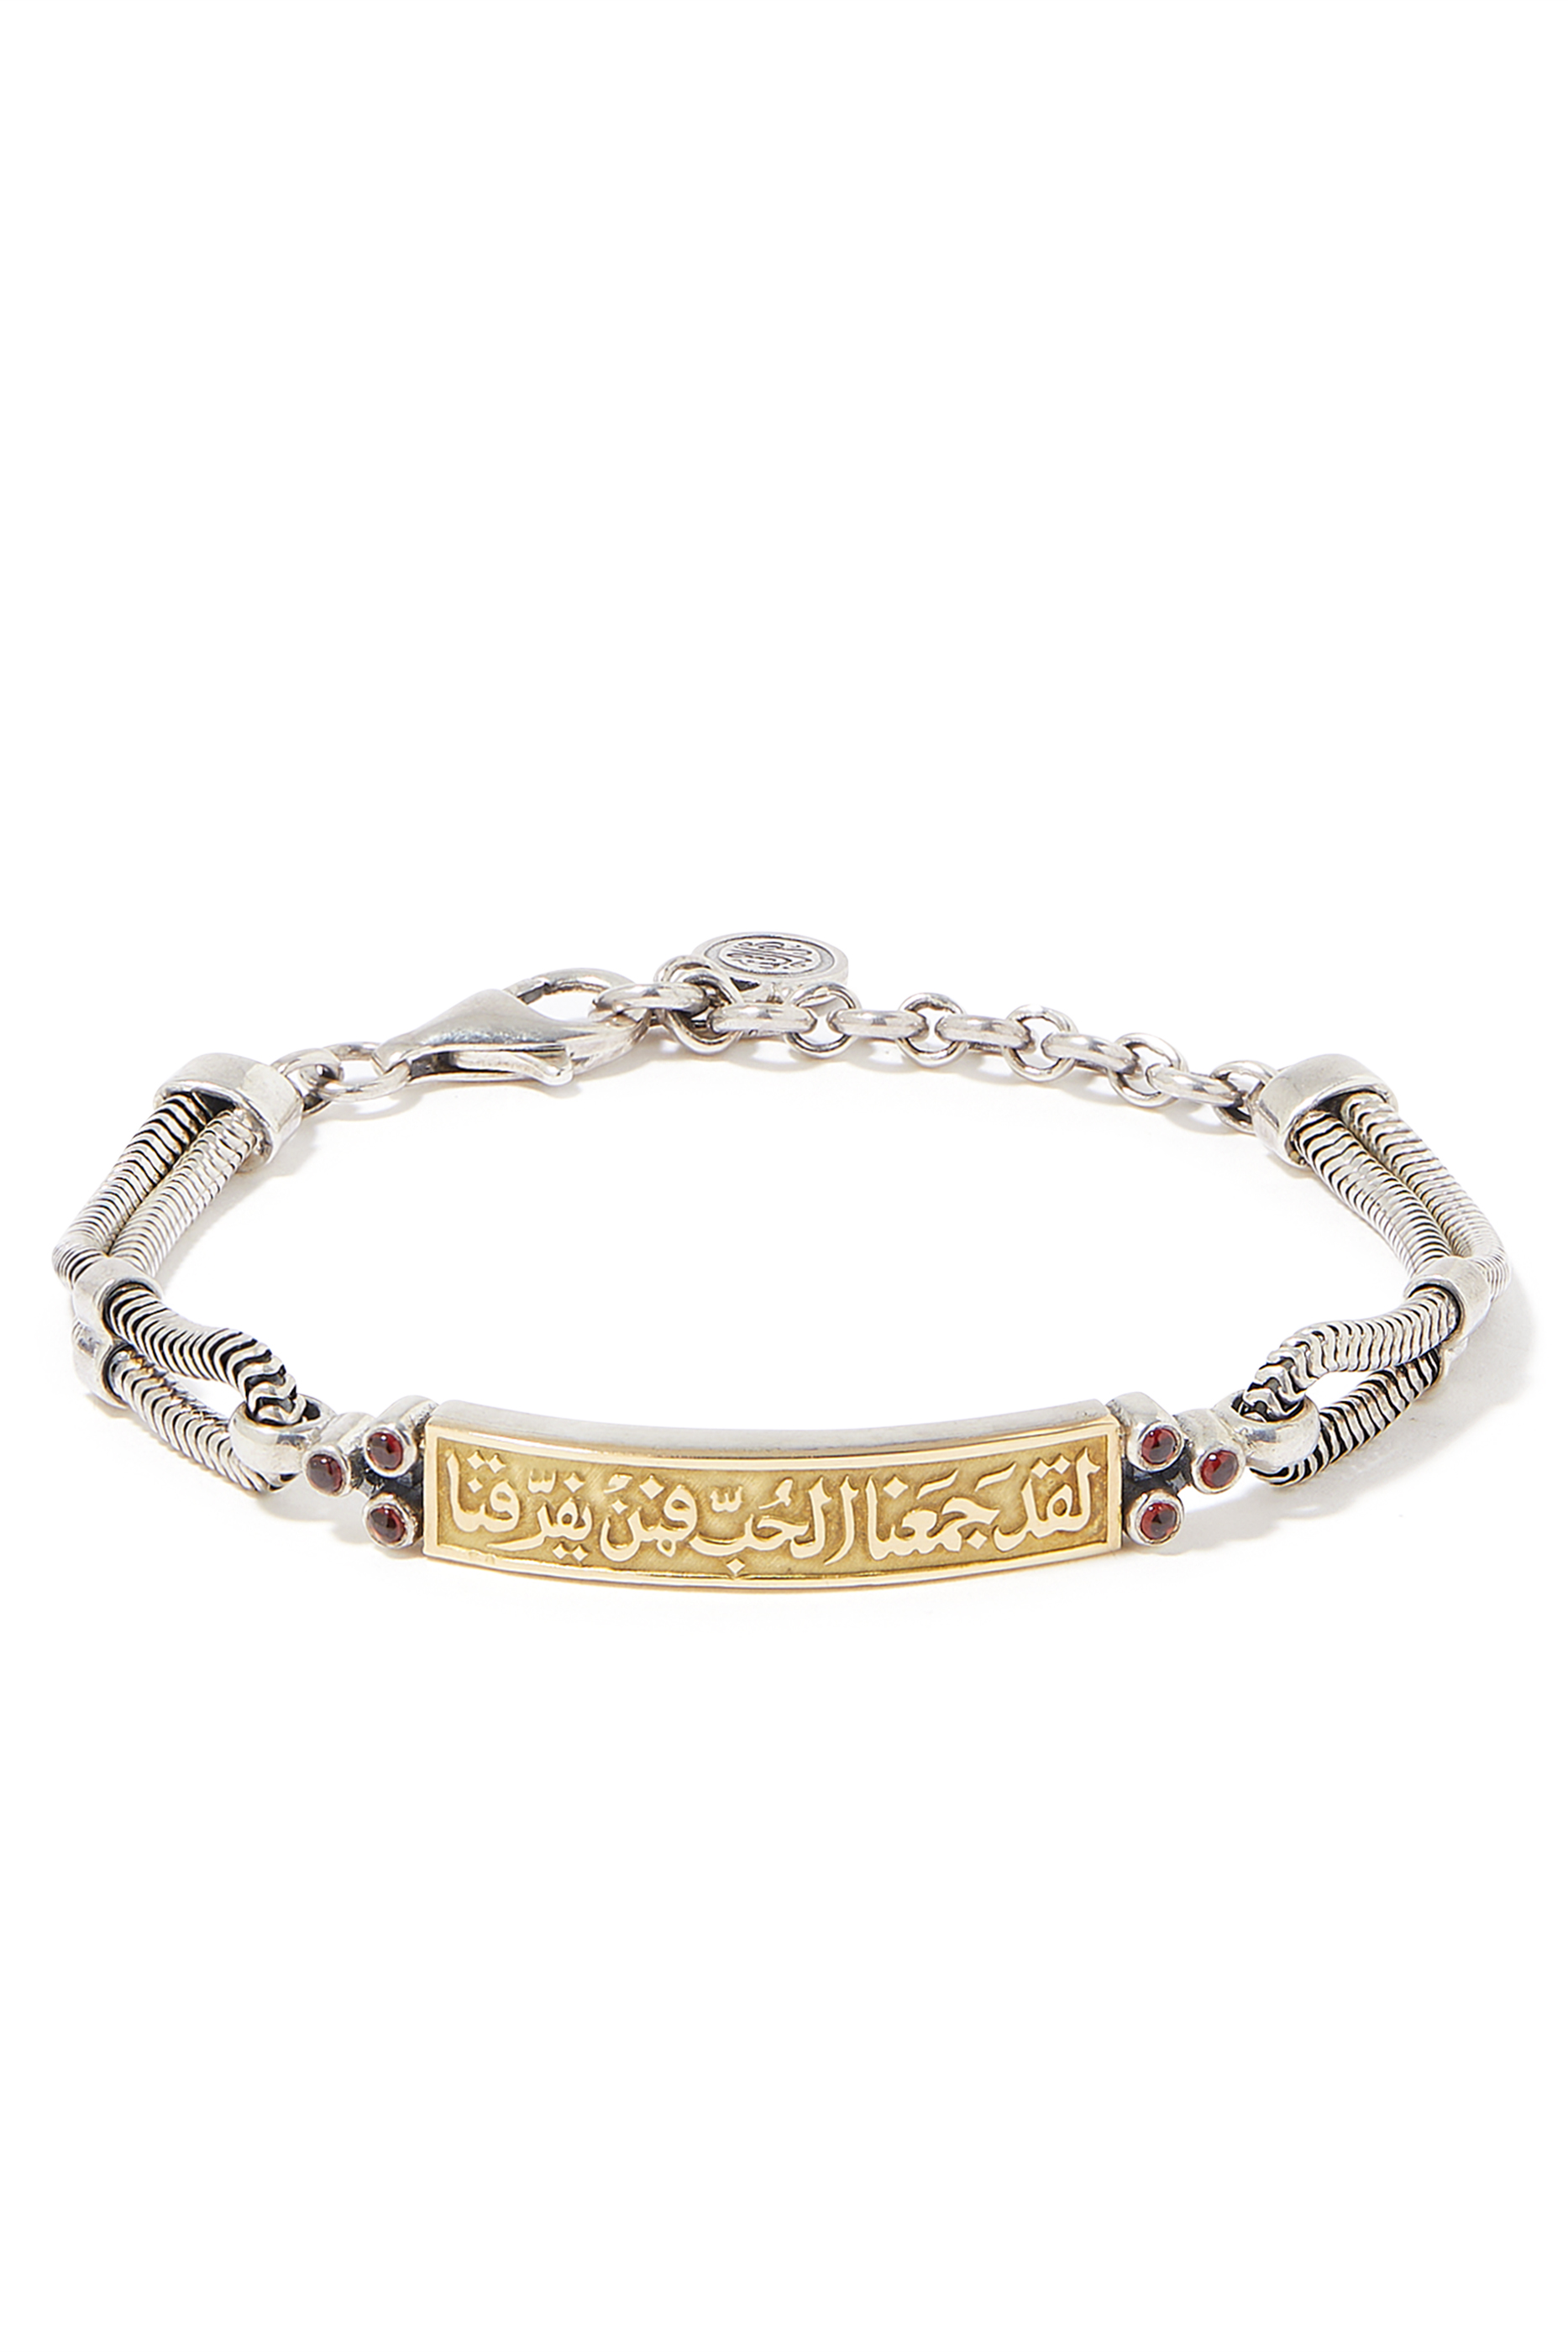 Azza Fahmy Silver and Gold Bracelet.. inscribed with 